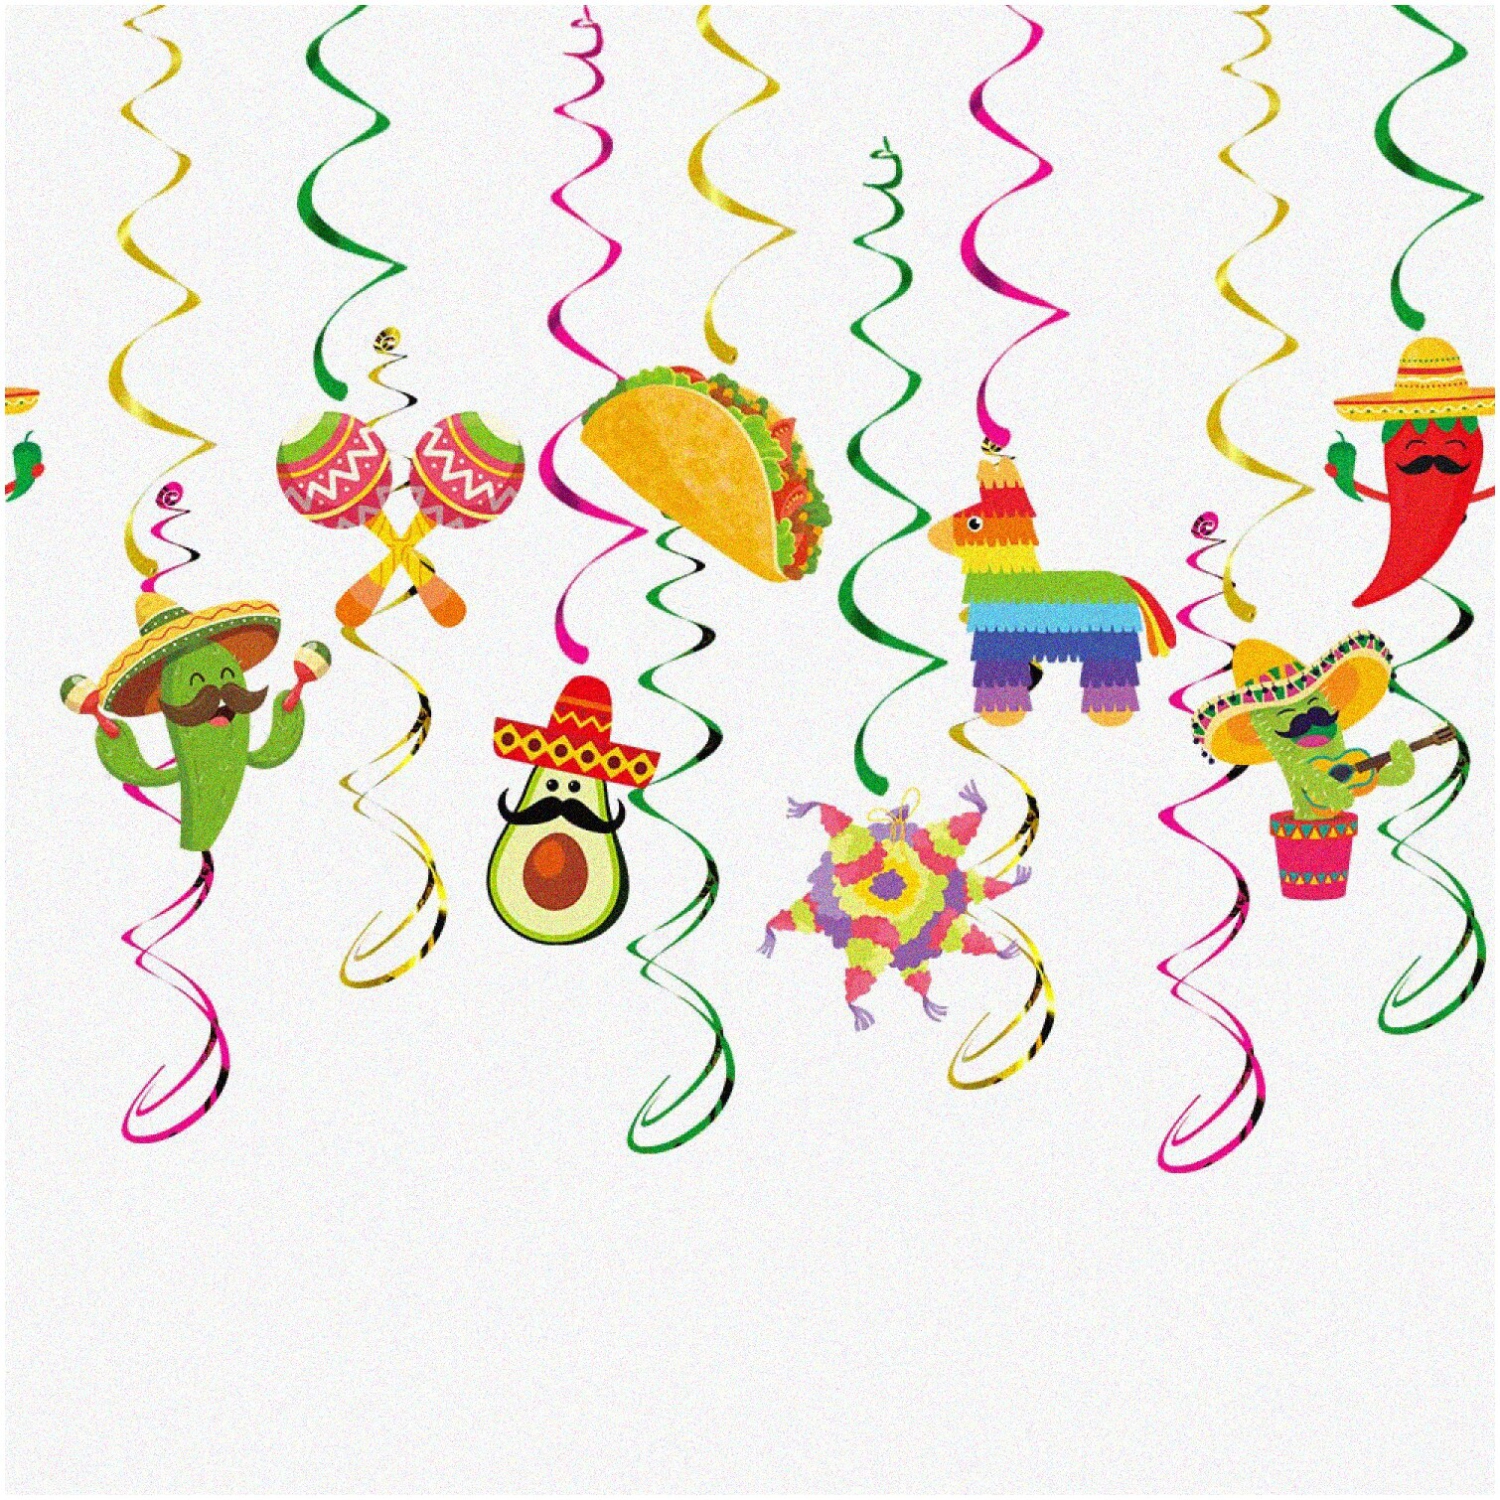 Mexican Fiesta Swirls: 14pc Cinco De Mayo Hanging Decorations - Let's Fiesta Taco Themed Party Decorations